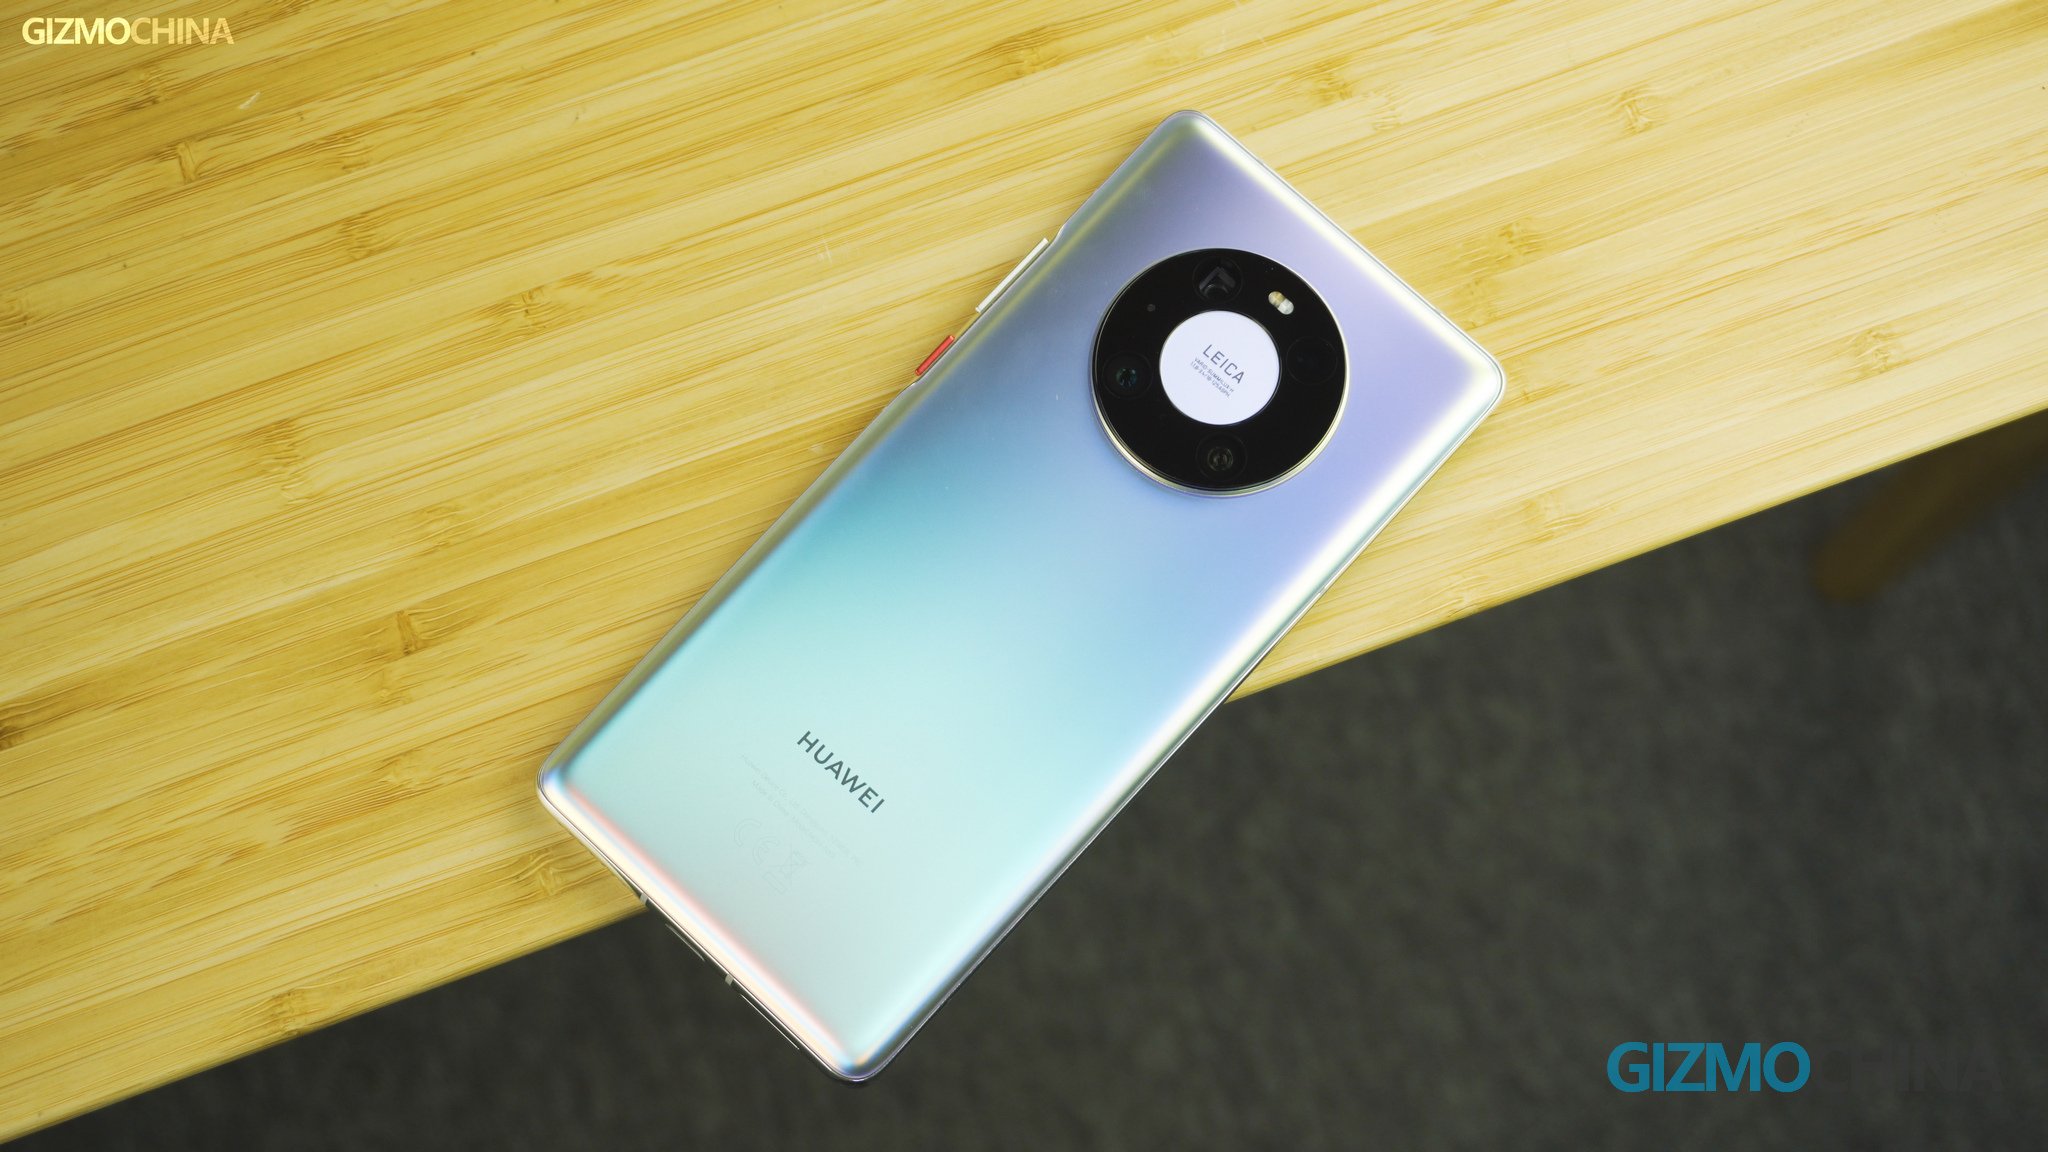 Huawei reportedly in discussion to sell its flagship P and Mate brands